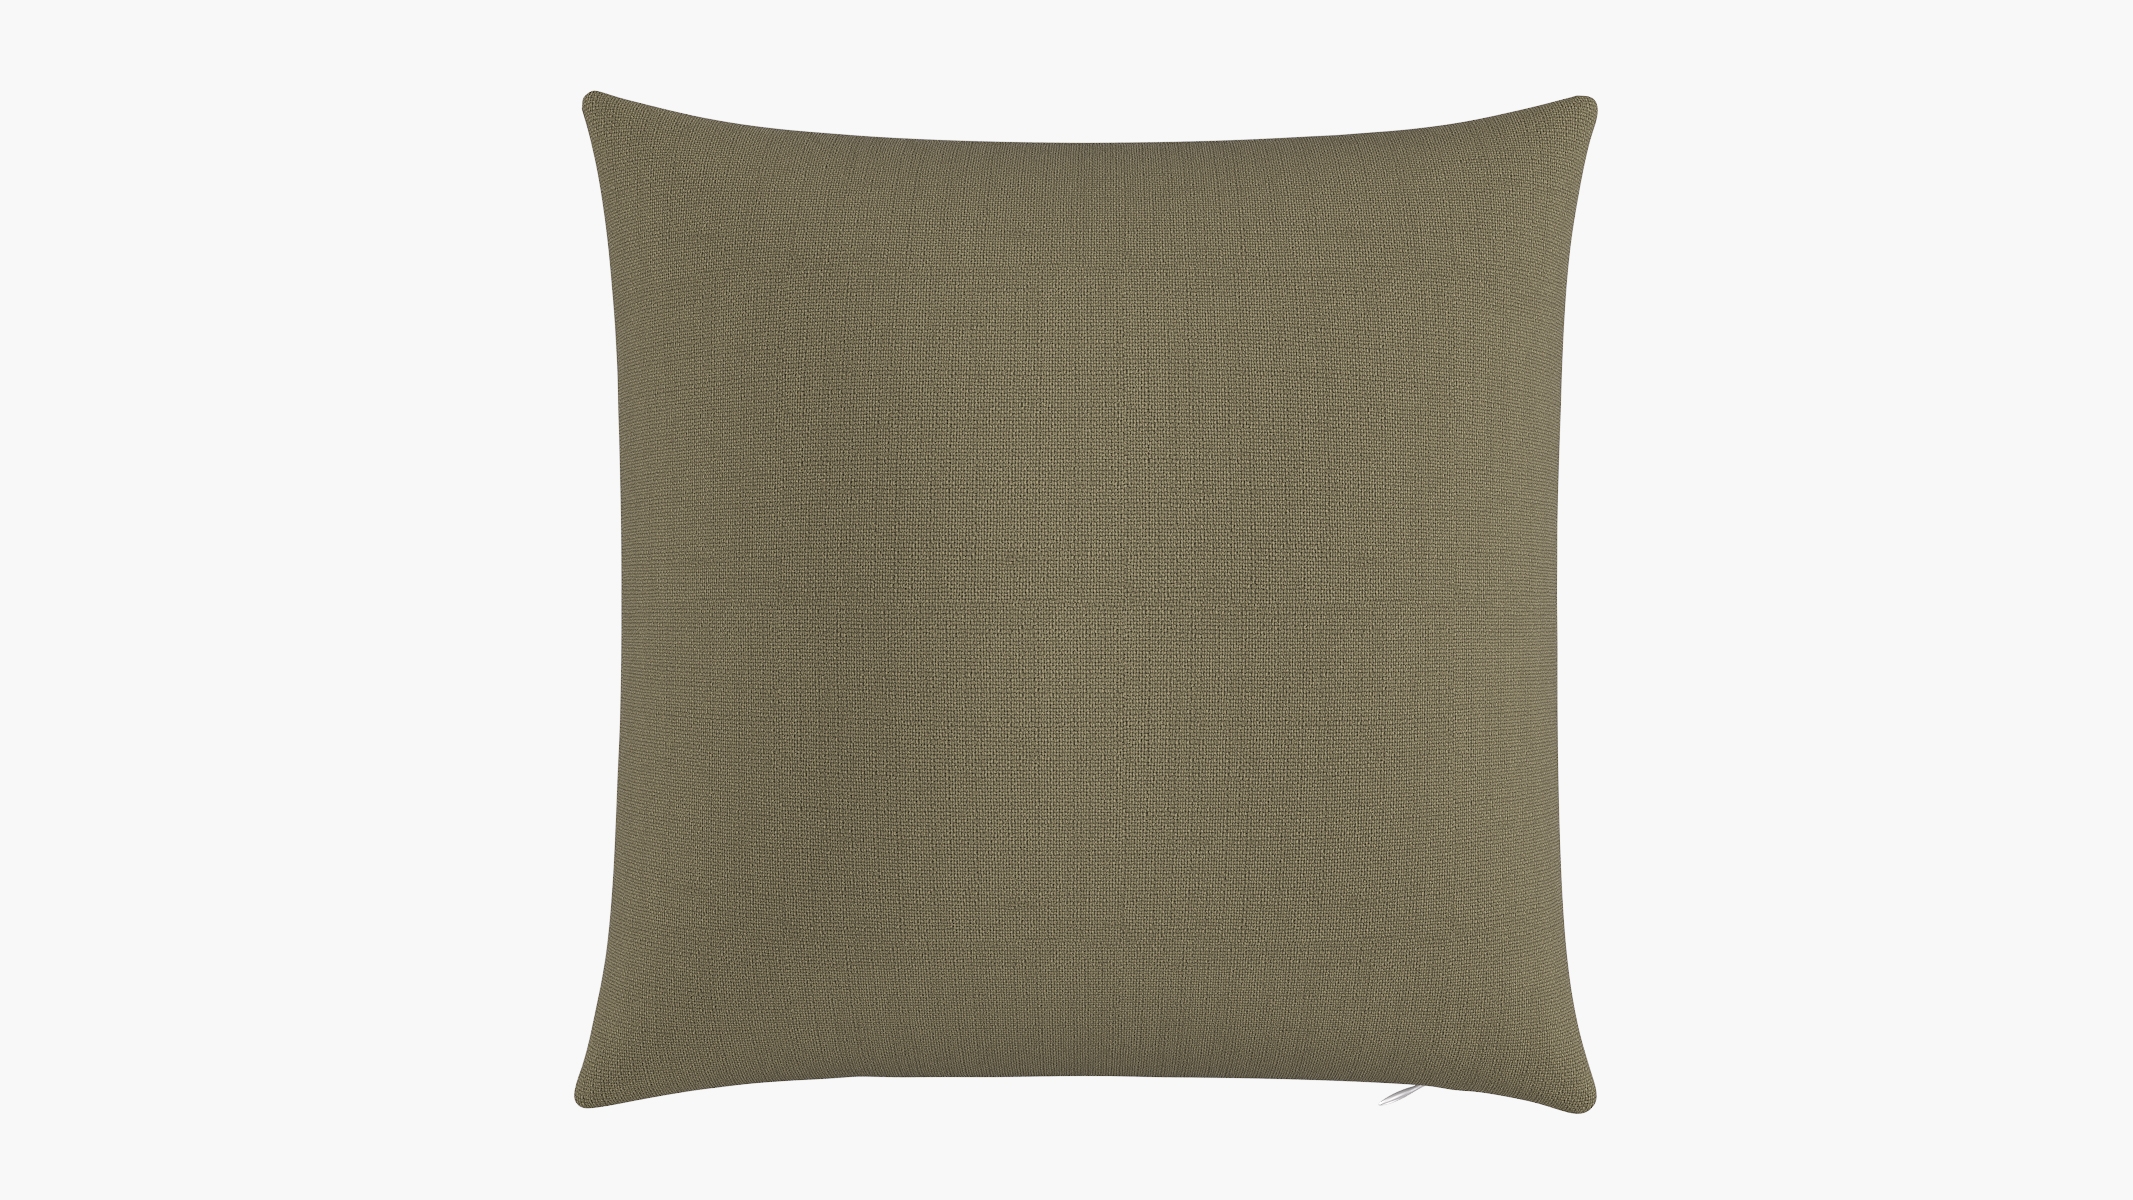 Throw Pillow 20", Olive Everyday Linen, 20" x 20" - Image 0